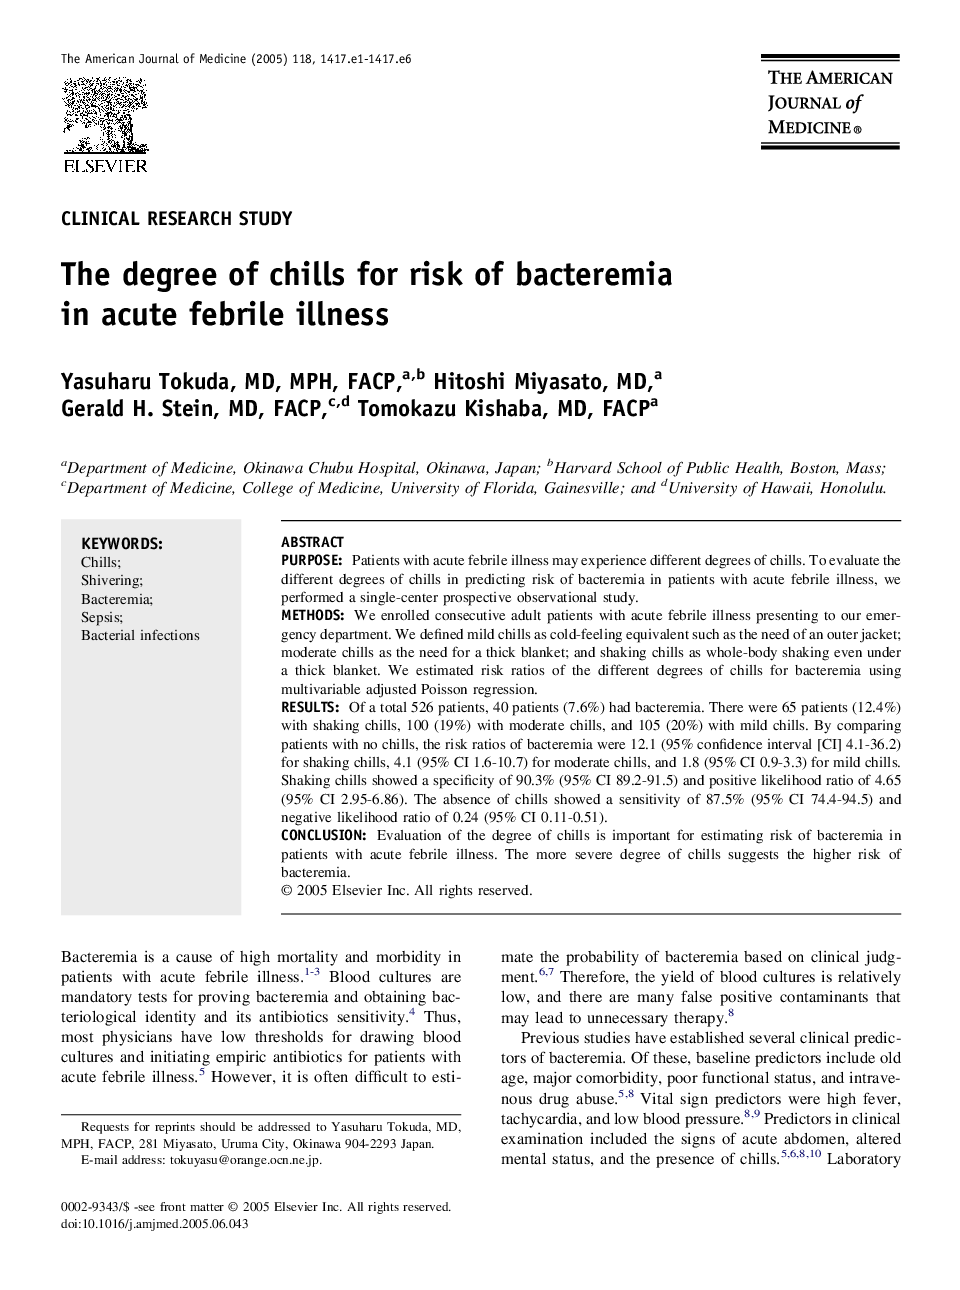 The degree of chills for risk of bacteremia in acute febrile illness